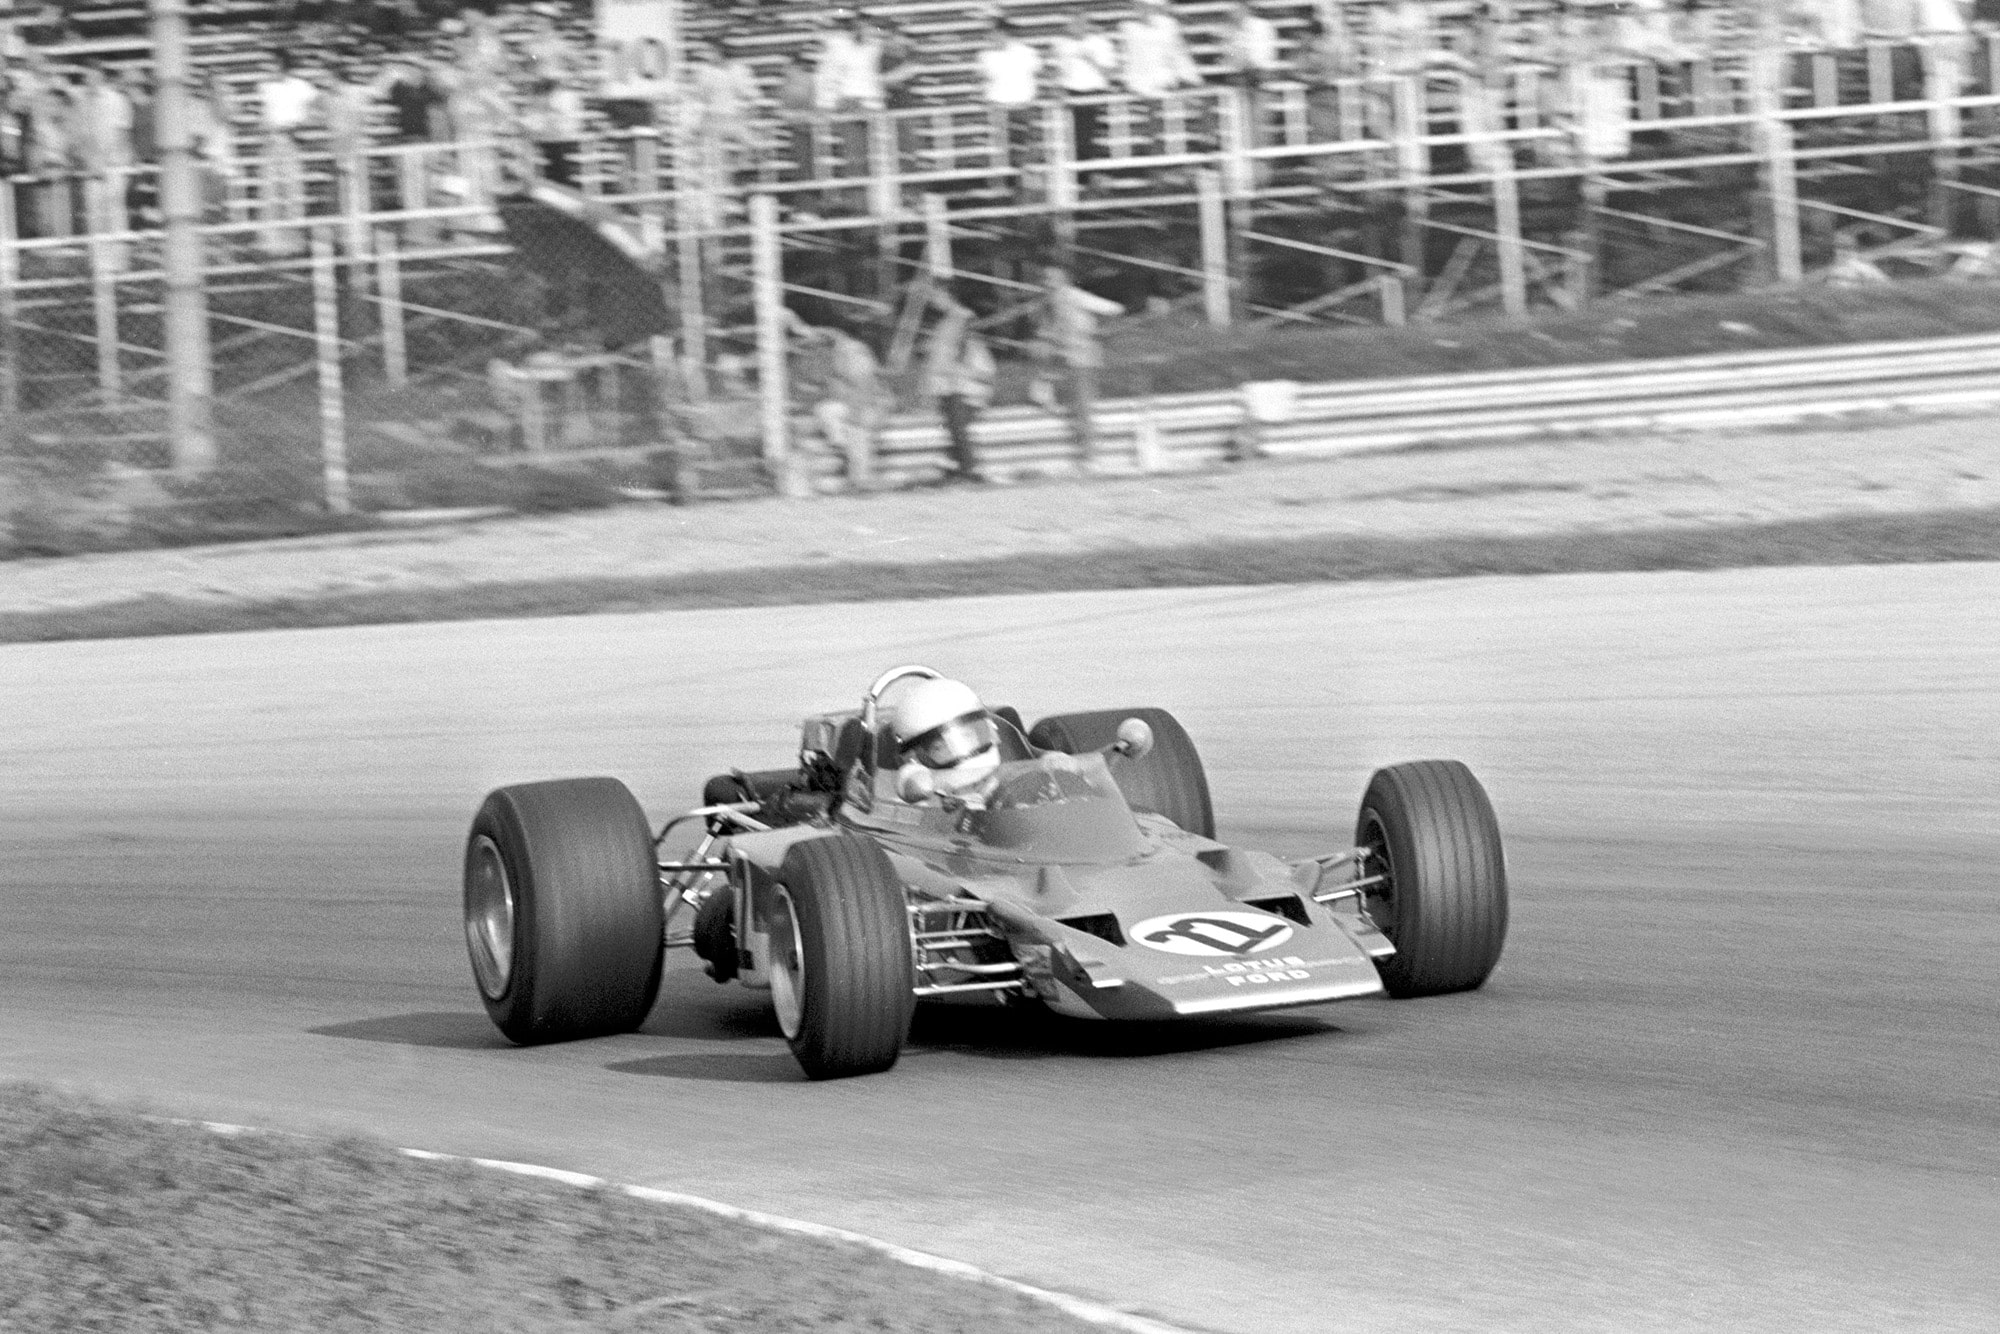 Jochen Rindt in his Lotus with no wings before his fatal crash during the 1970 Italian Grand Prix